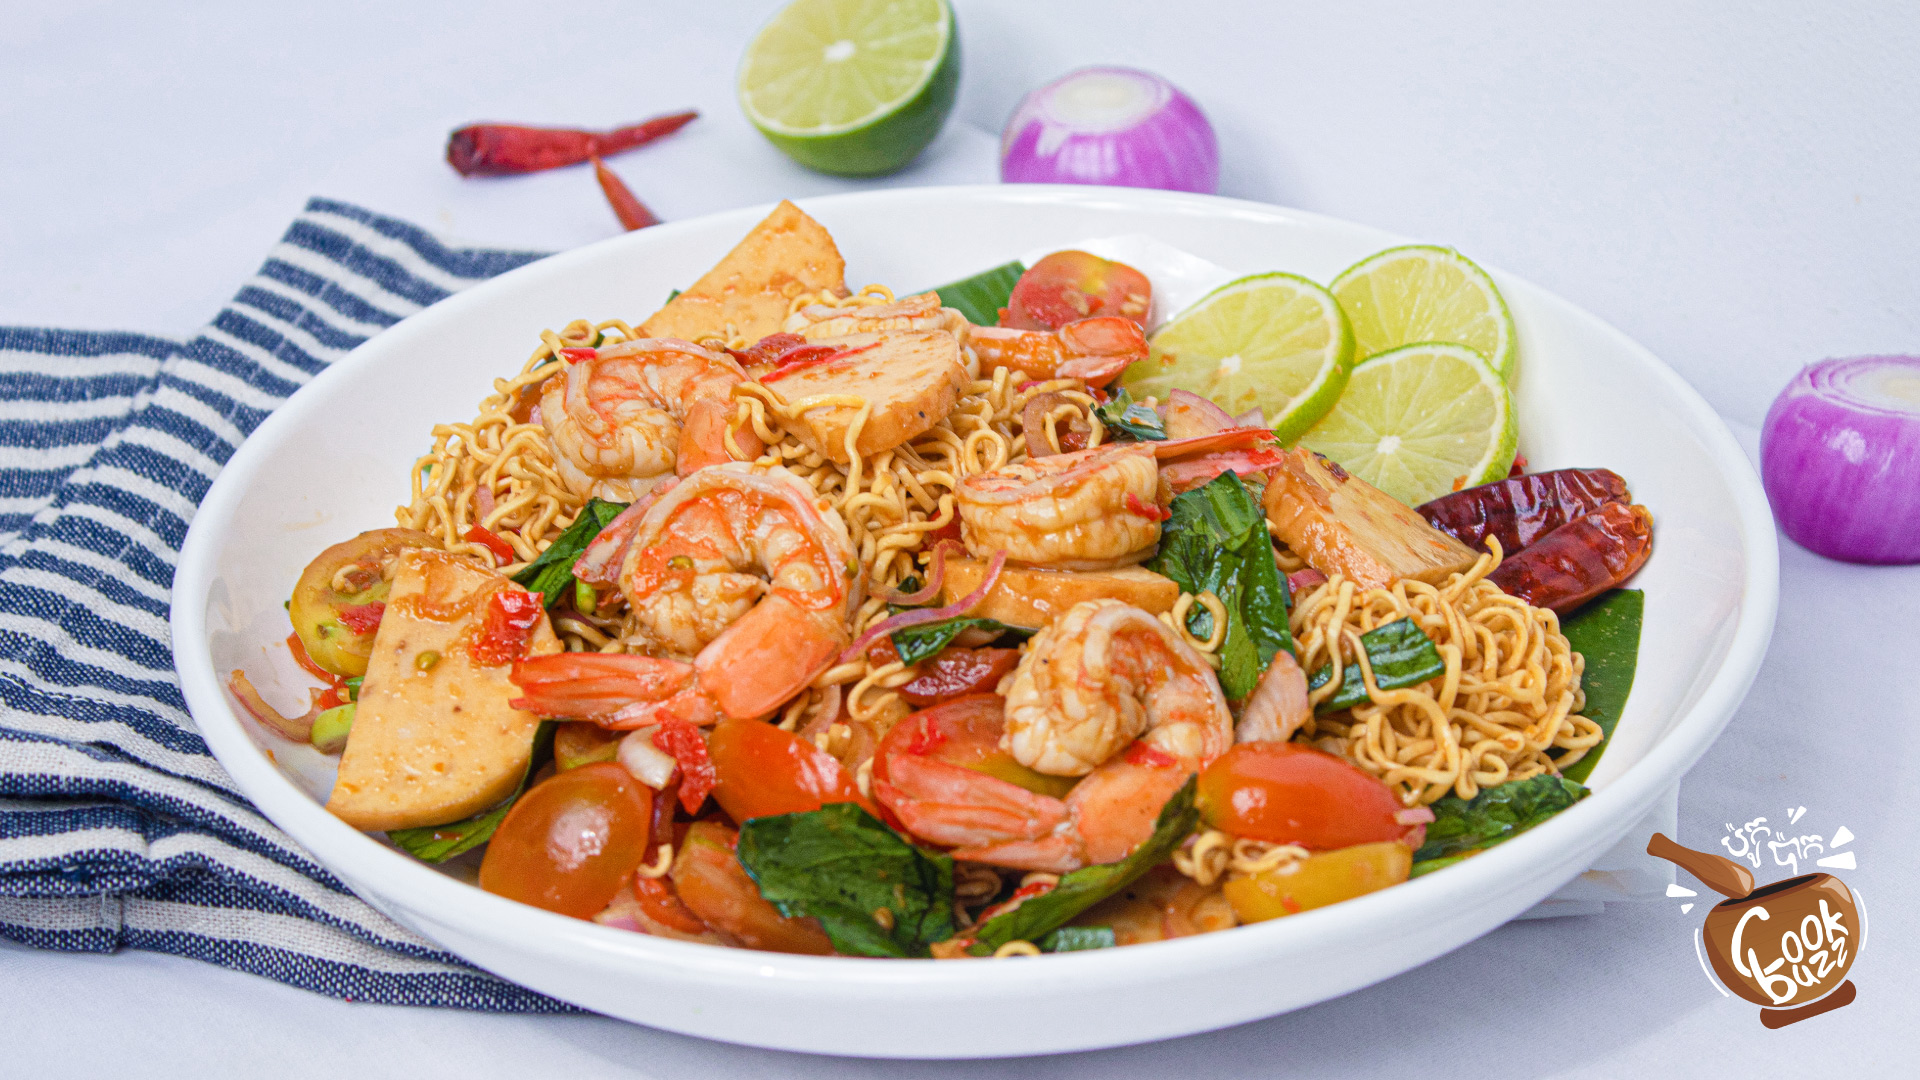 Homemade Thai-style "Shrimp Noodle Salad" with a new recipe!